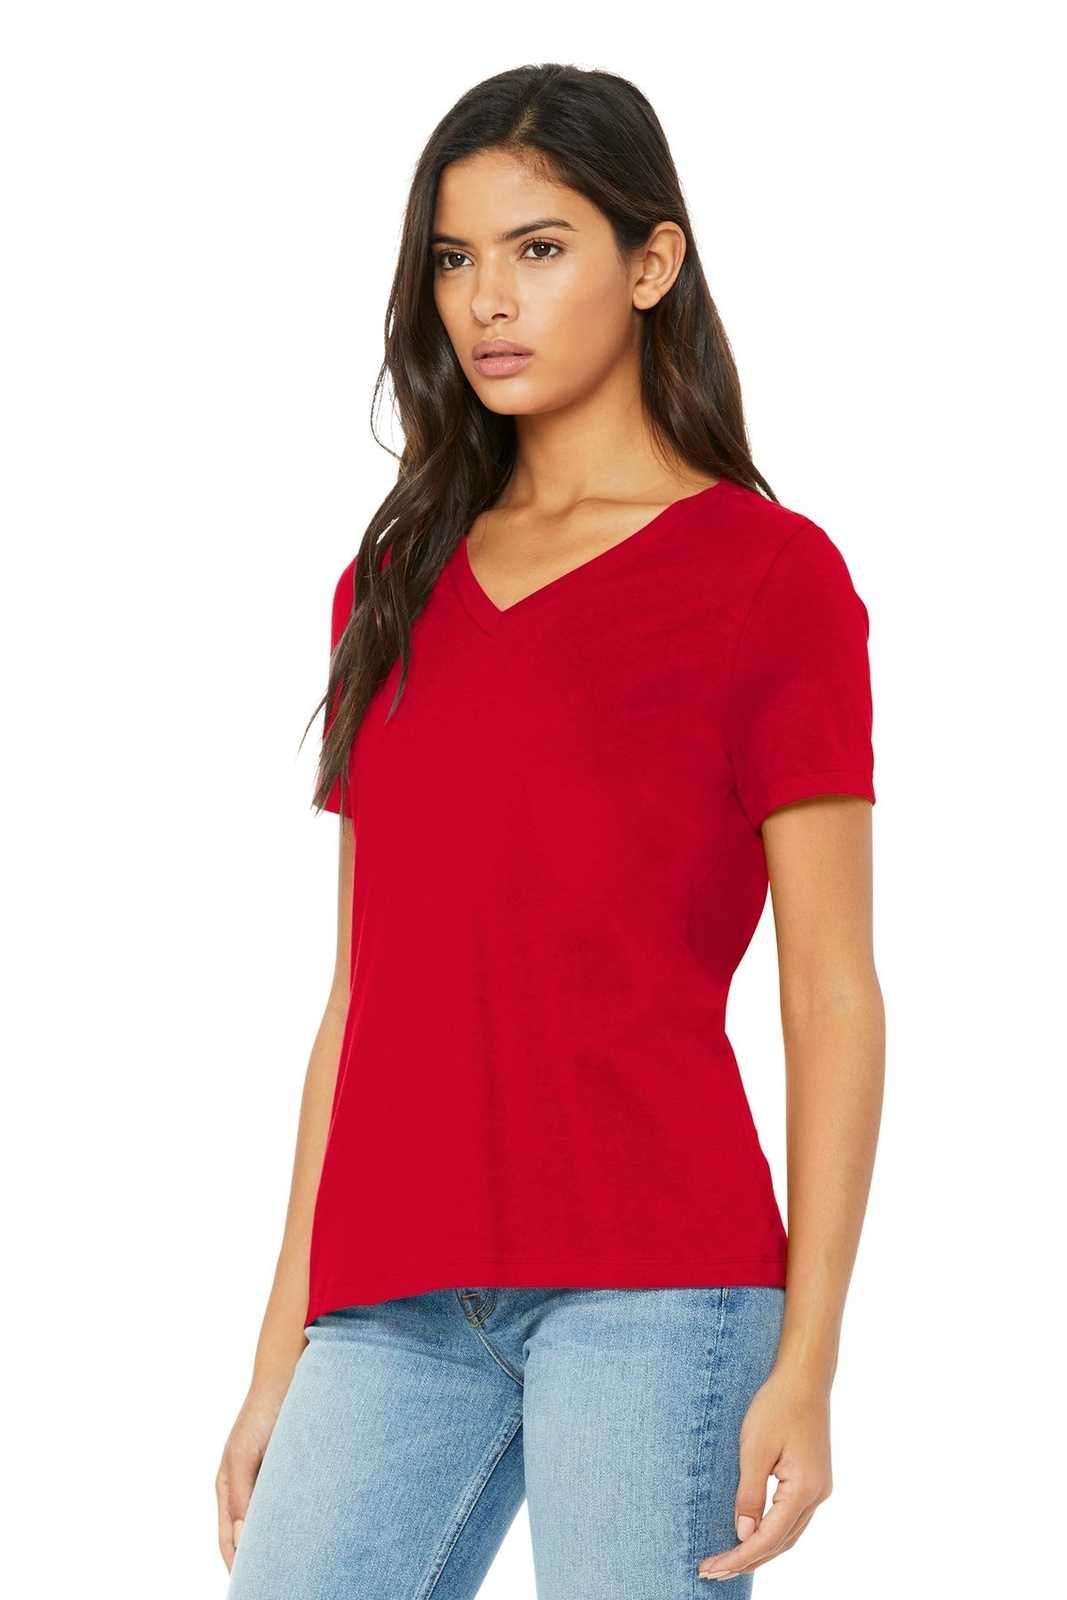 Bella + Canvas 6405 Women's Relaxed Jersey Short Sleeve V-Neck Tee - R